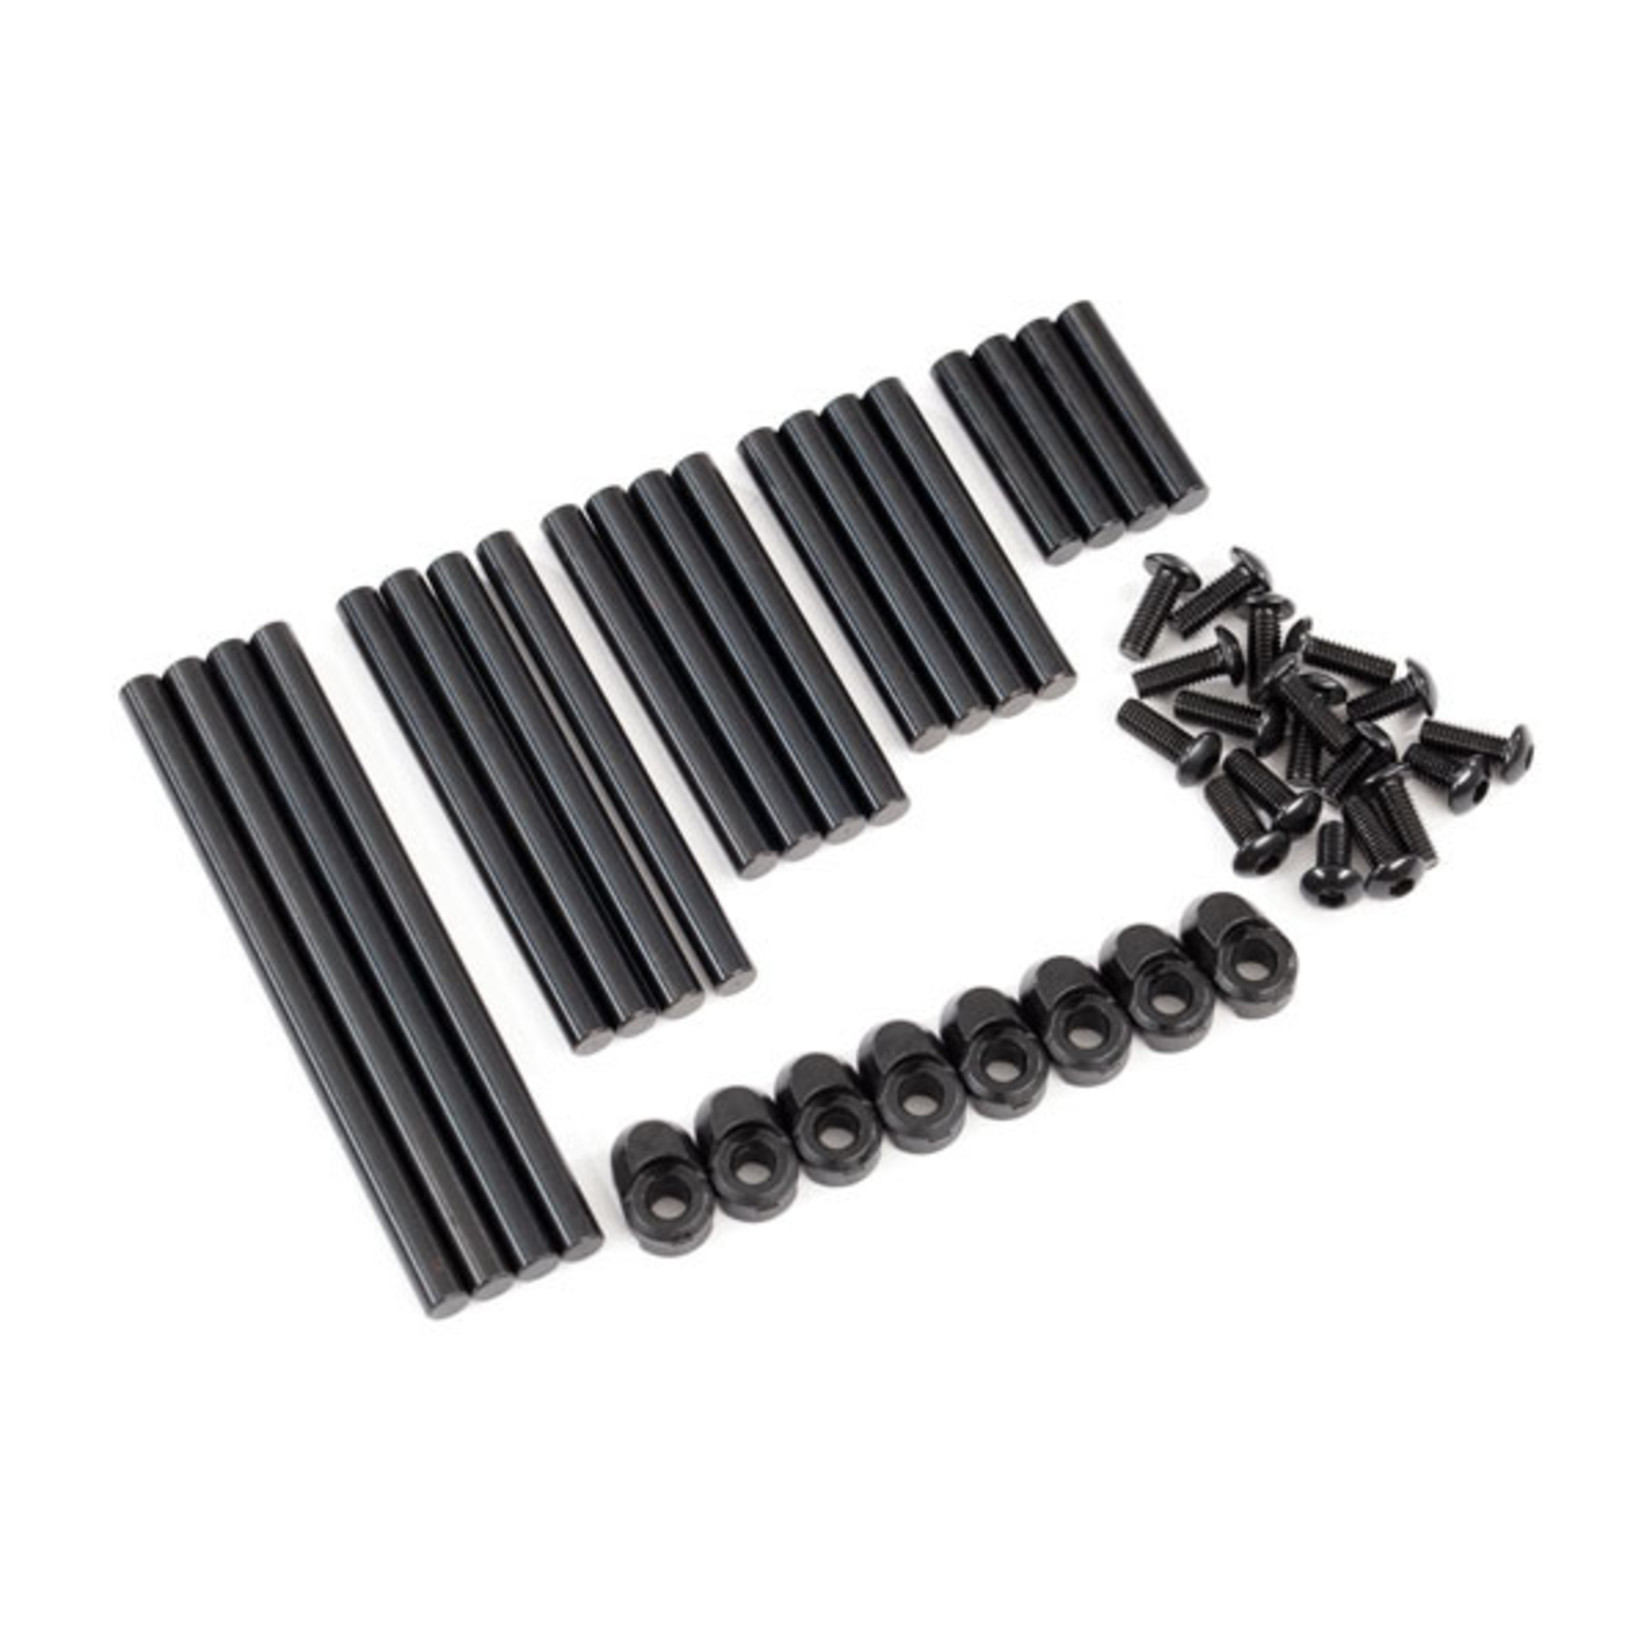 Traxxas 8940X - Suspension pin set, complete (hardened ste